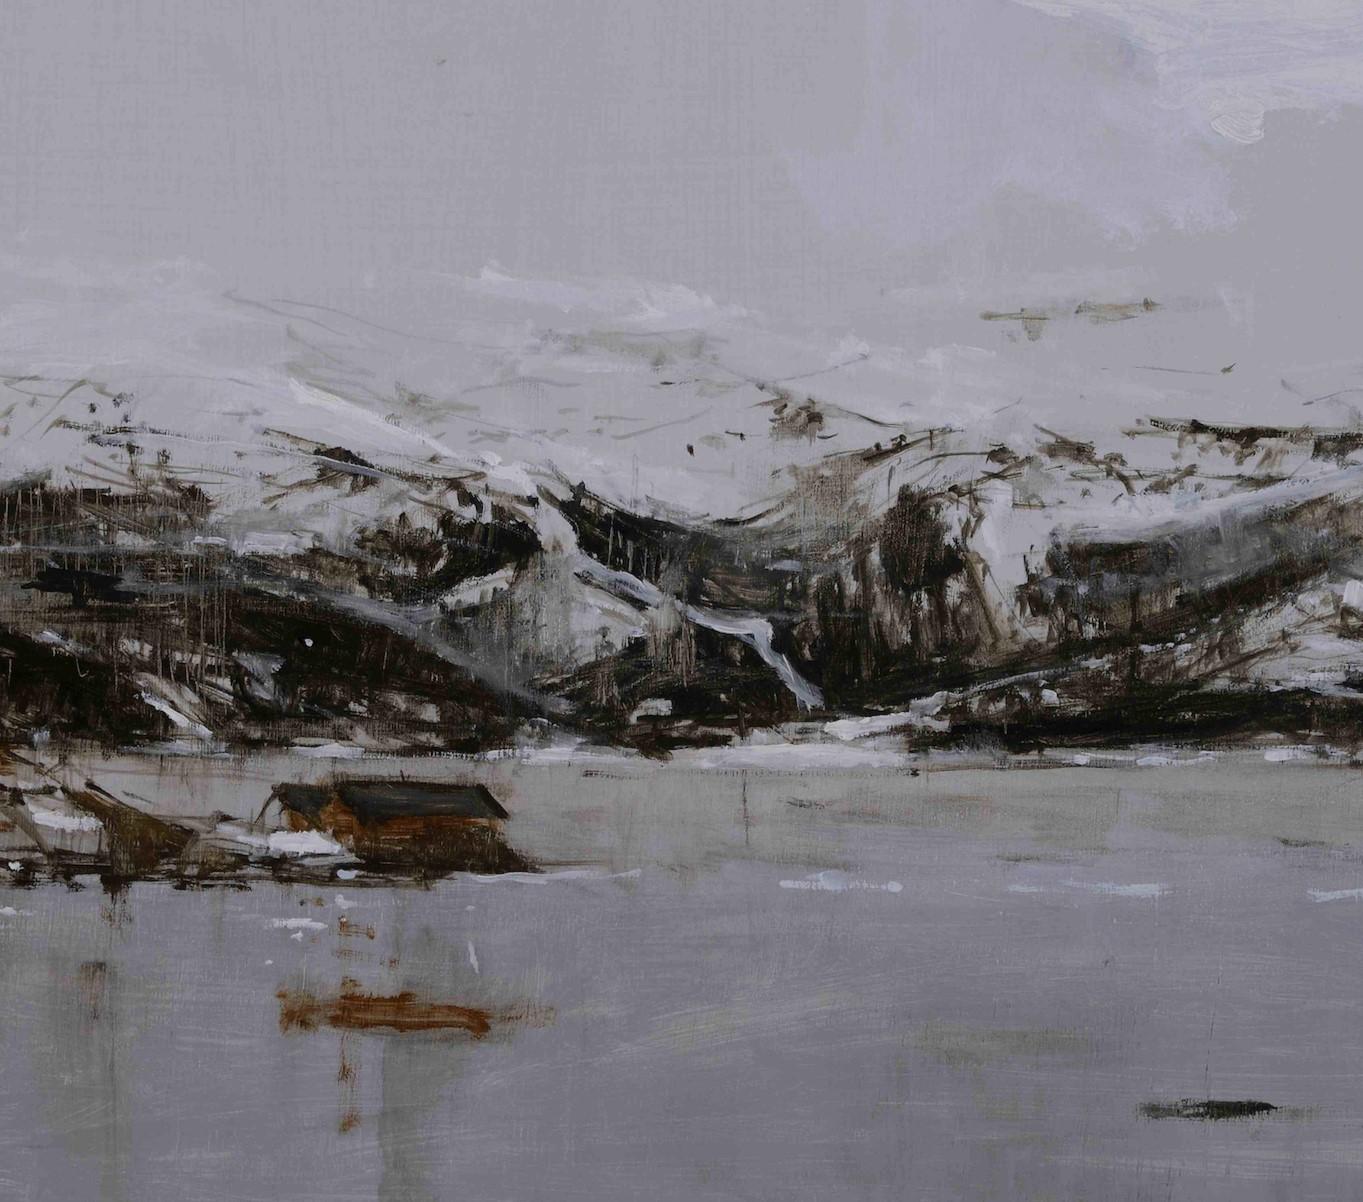 Narvik No. 4 by Calo Carratalá - Landscape painting, snowy mountain, winter For Sale 3